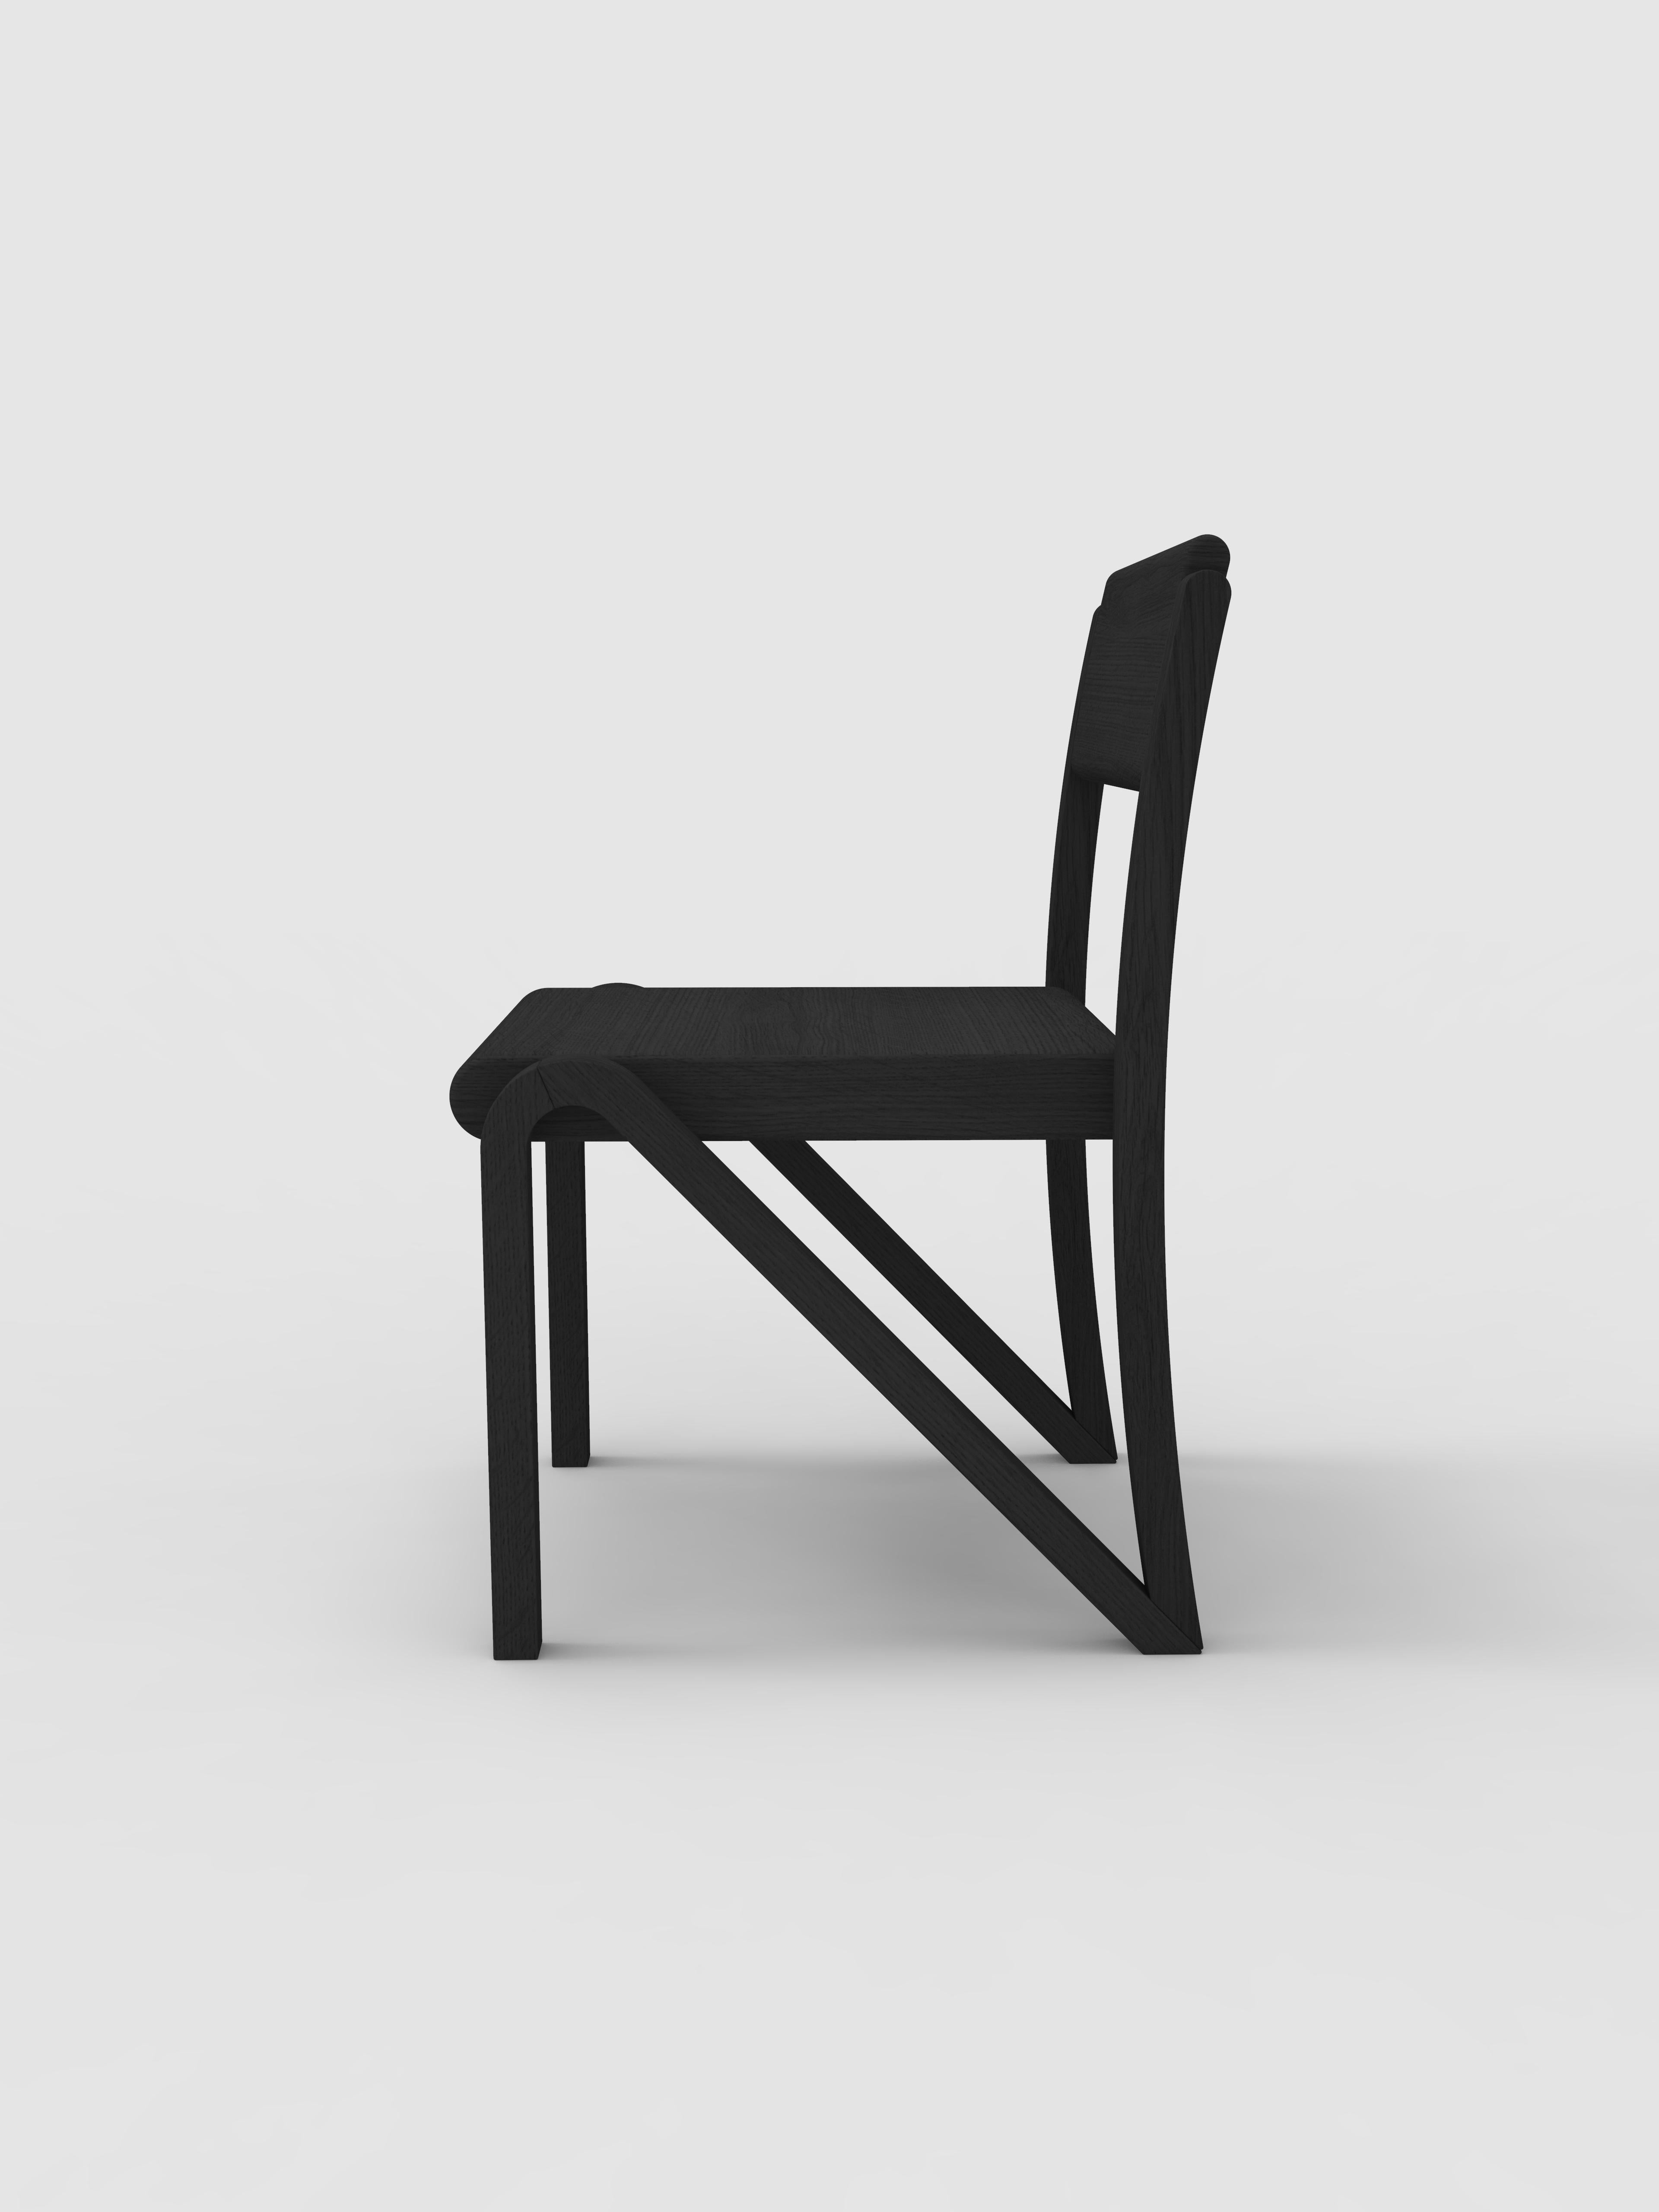 Orphan Work 200 Side Chair
Shown in blackened oak
Measures: 19 3/4” D x 17 1/2” W x 31” H
Available in natural oak or blackened oak

Orphan work is designed to complement in the heart of Soho, New York City. Each piece is handmade in New York and